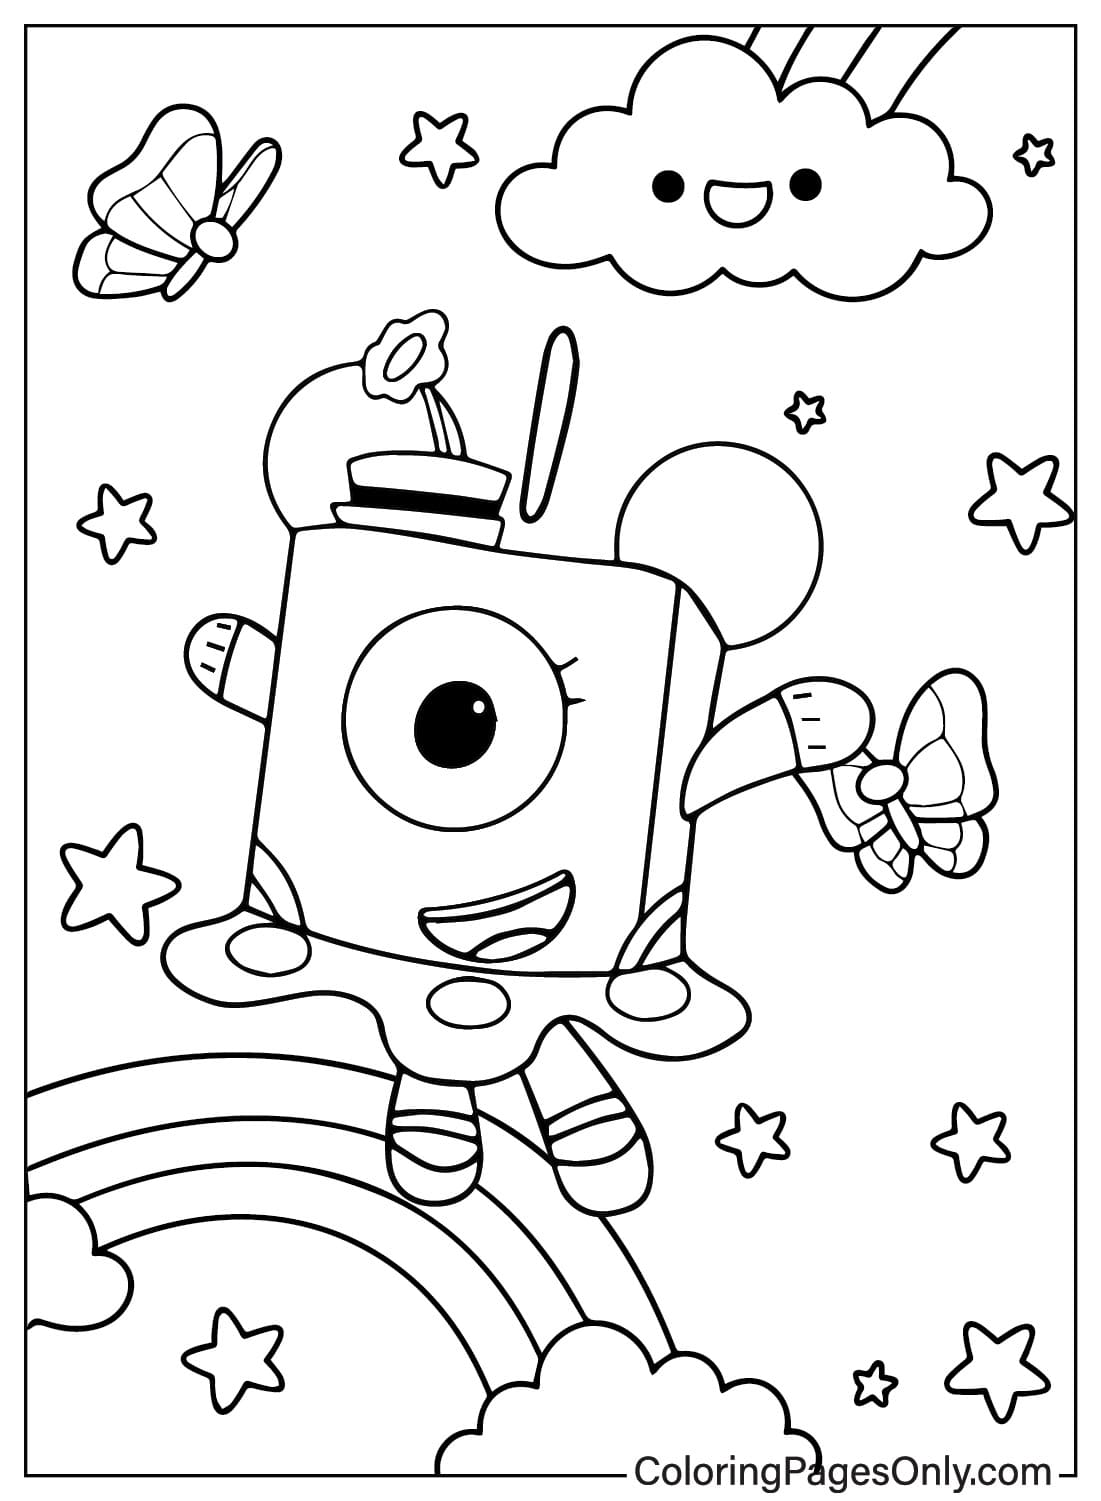 Numberblocks One Coloring Page Free from Numberblocks